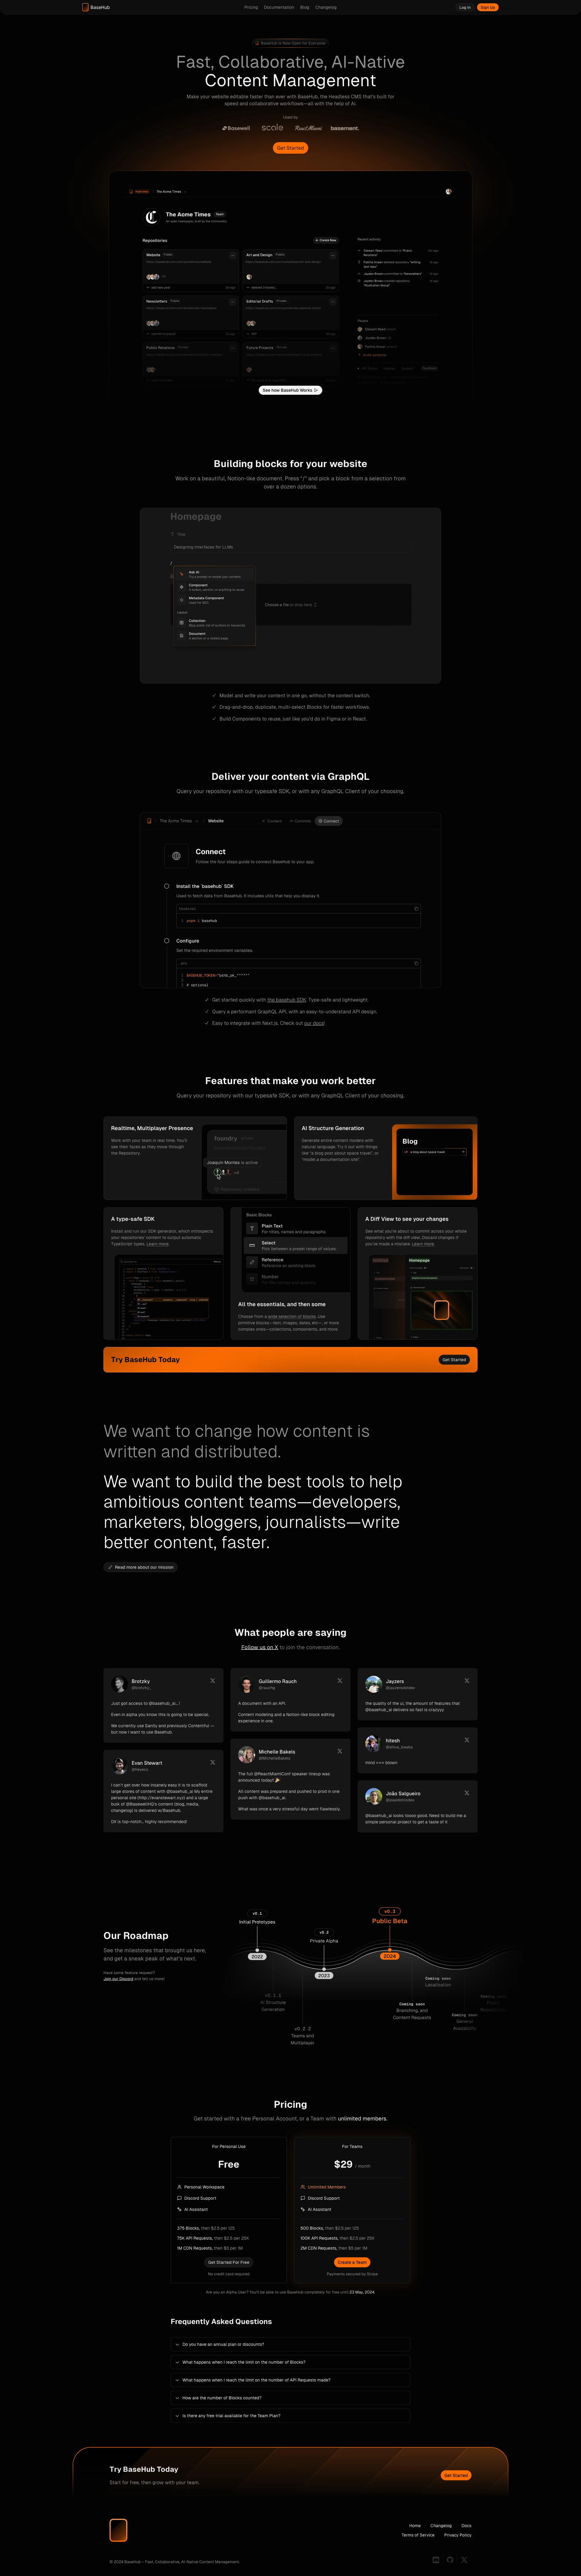 BaseHub Landing Page Example: Make your website editable faster than ever with BaseHub, the Headless CMS that’s built for speed and collaborative workflows—all with the help of AI.